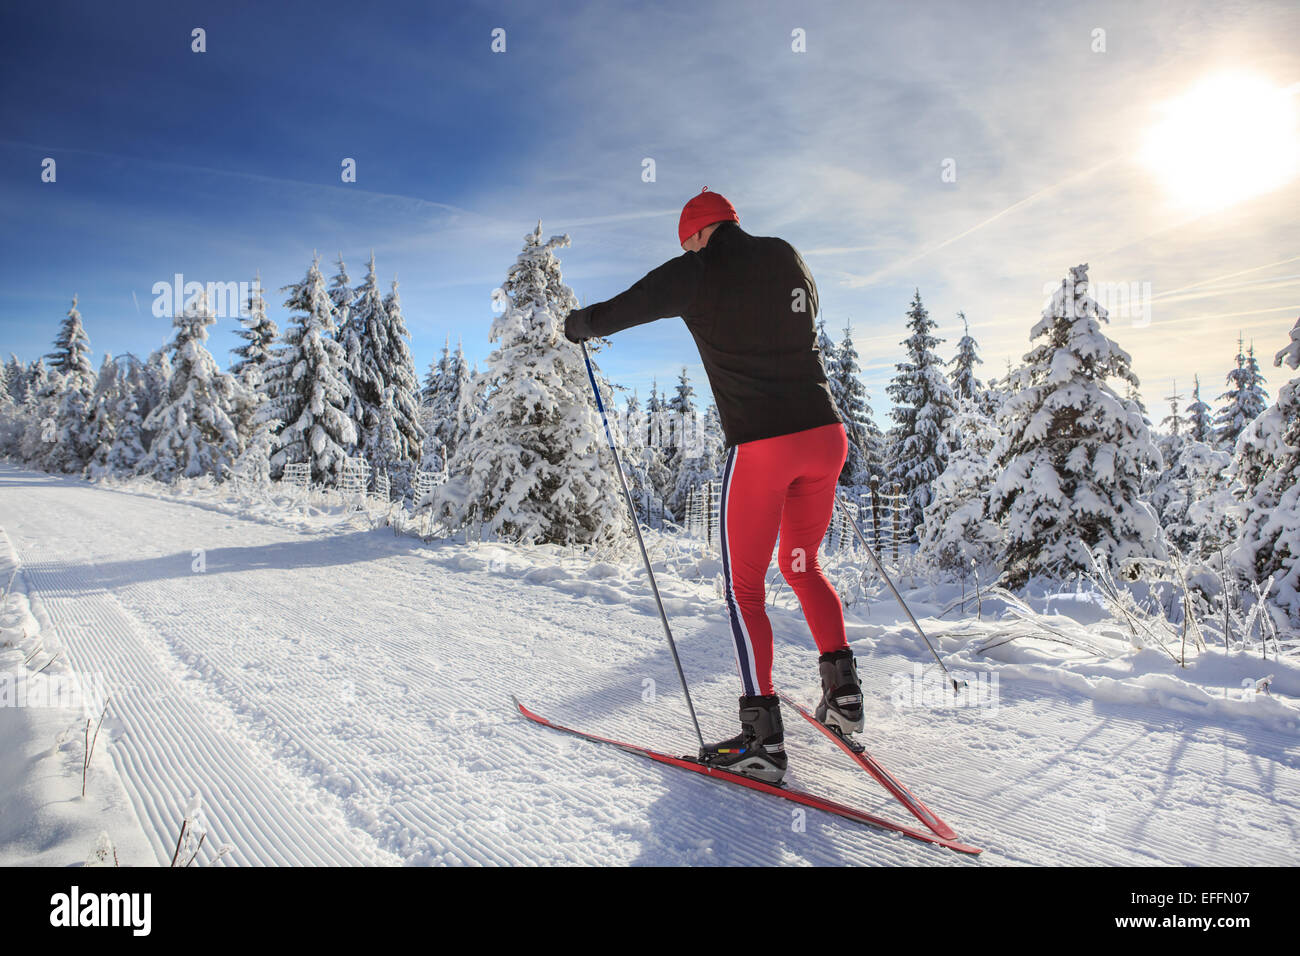 A man cross-country skiing on the forest trail Stock Photo